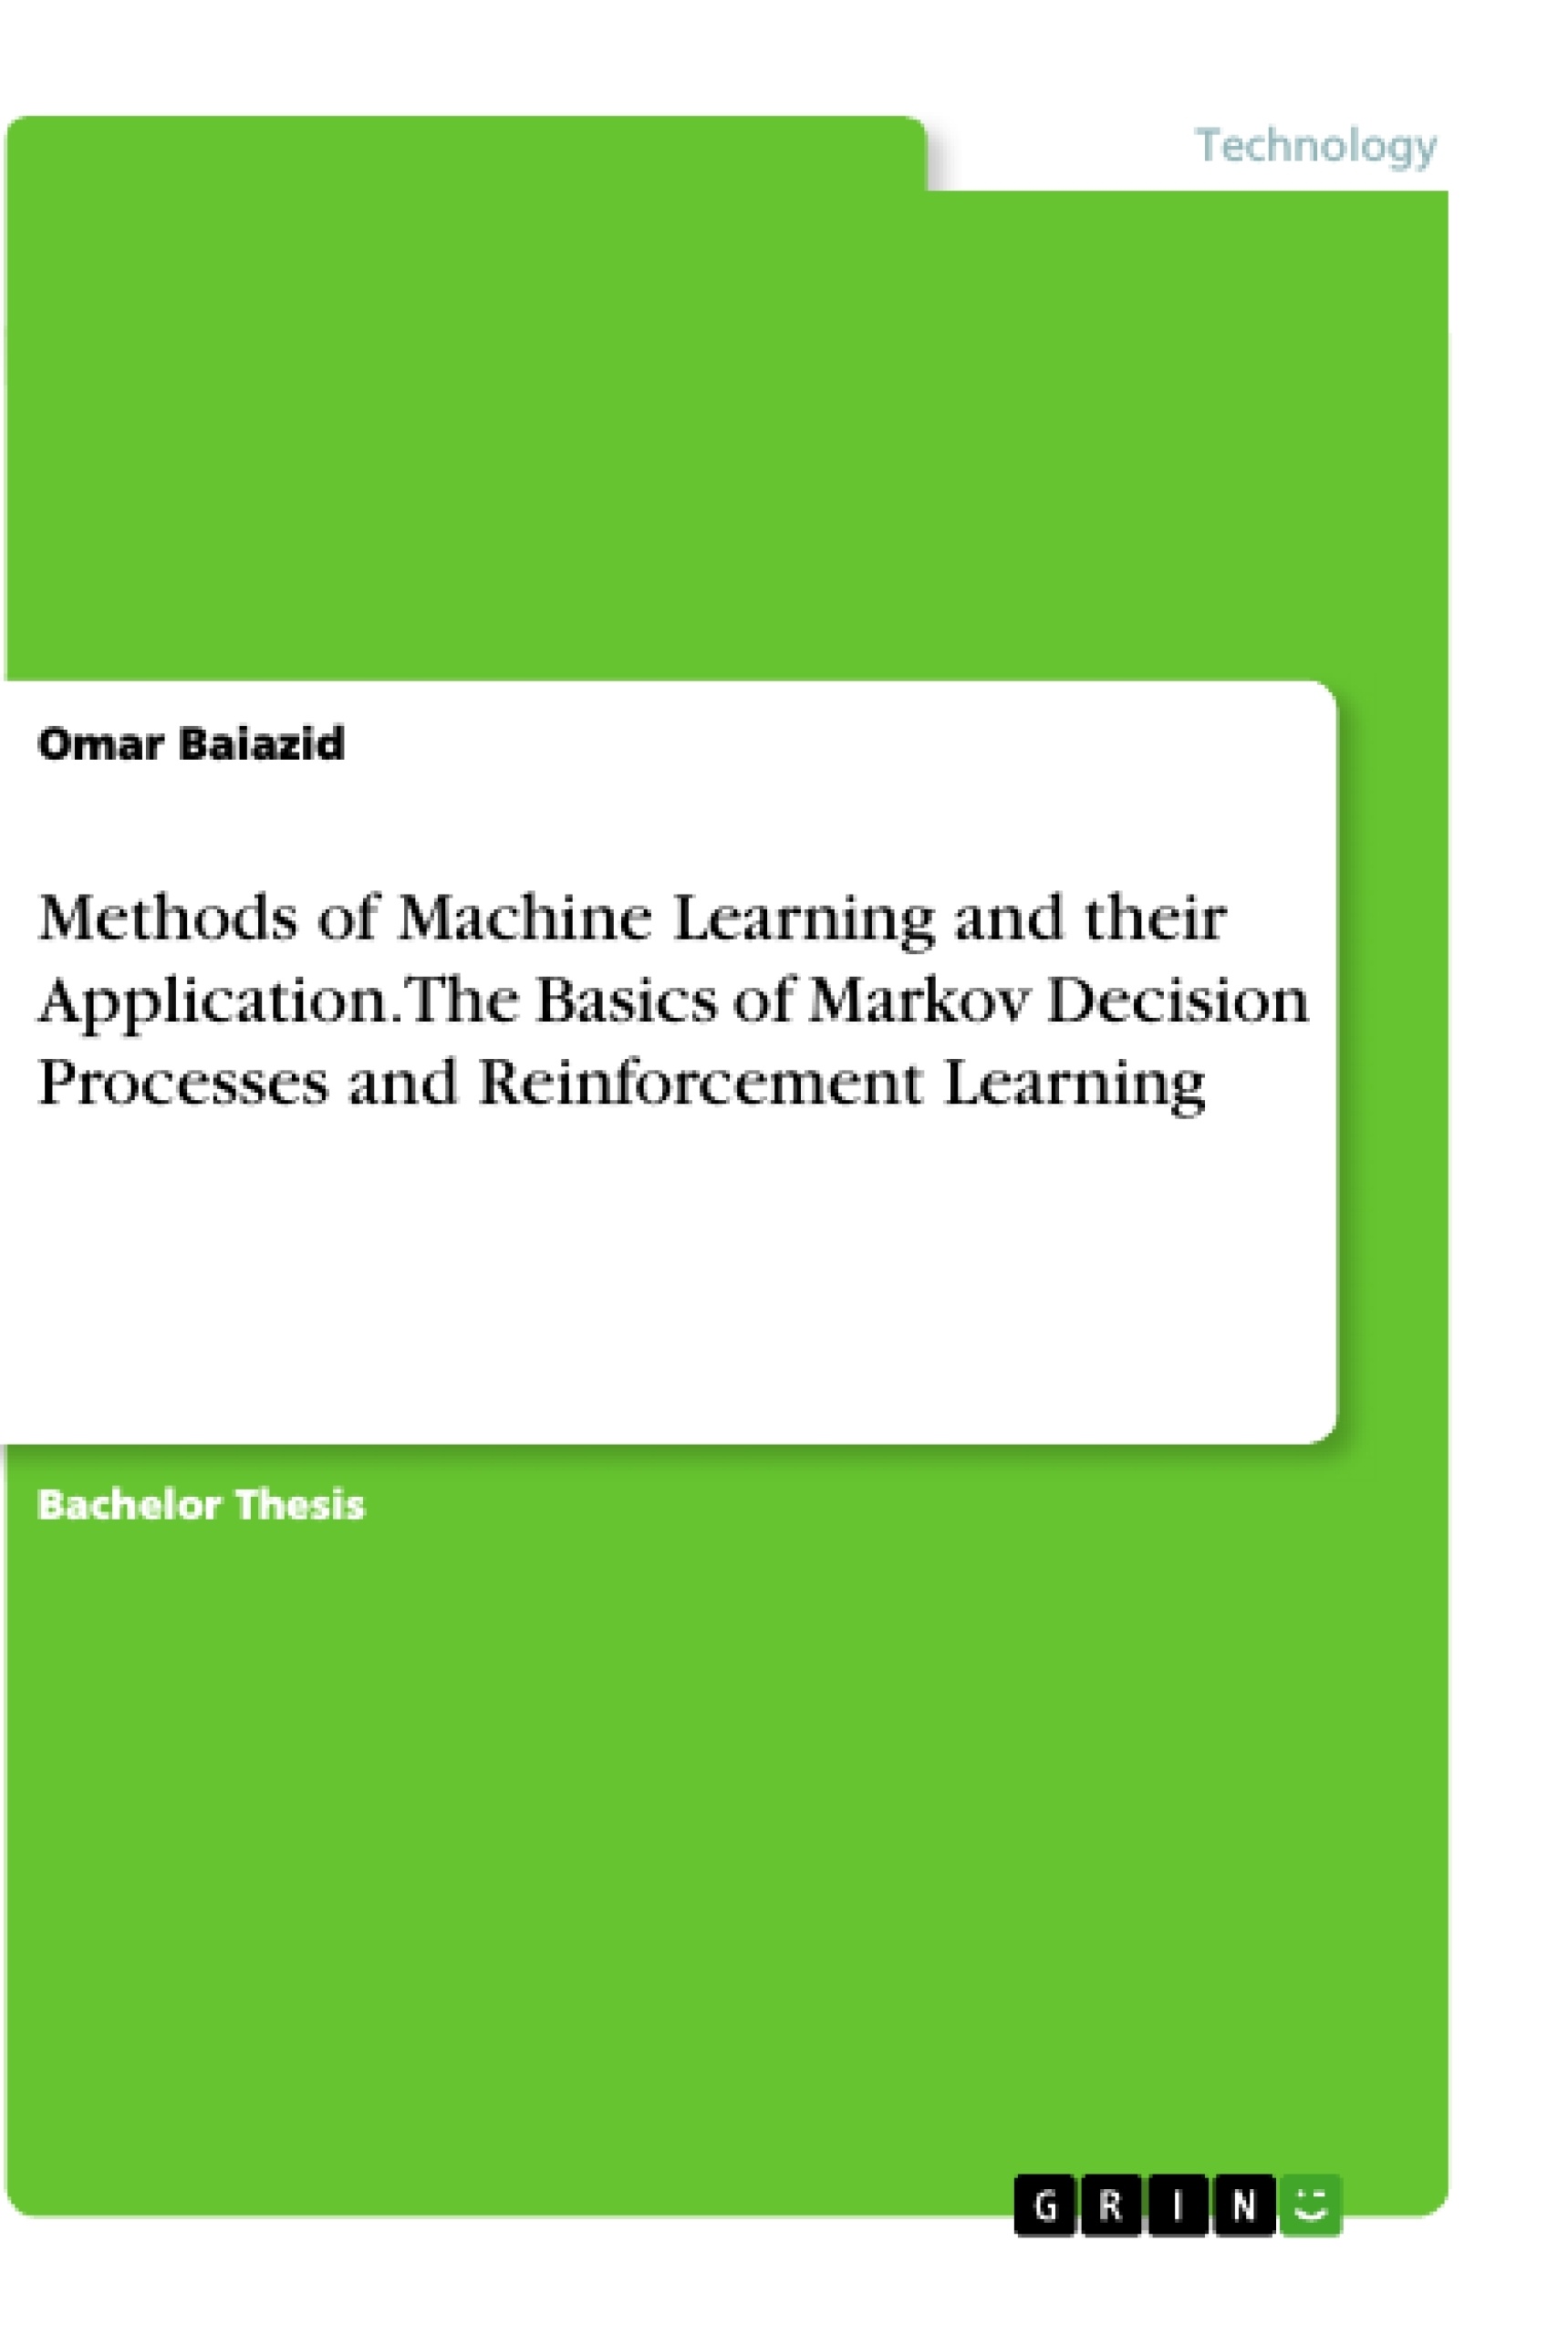 Title: Methods of Machine Learning and their Application. The Basics of Markov Decision Processes and Reinforcement Learning